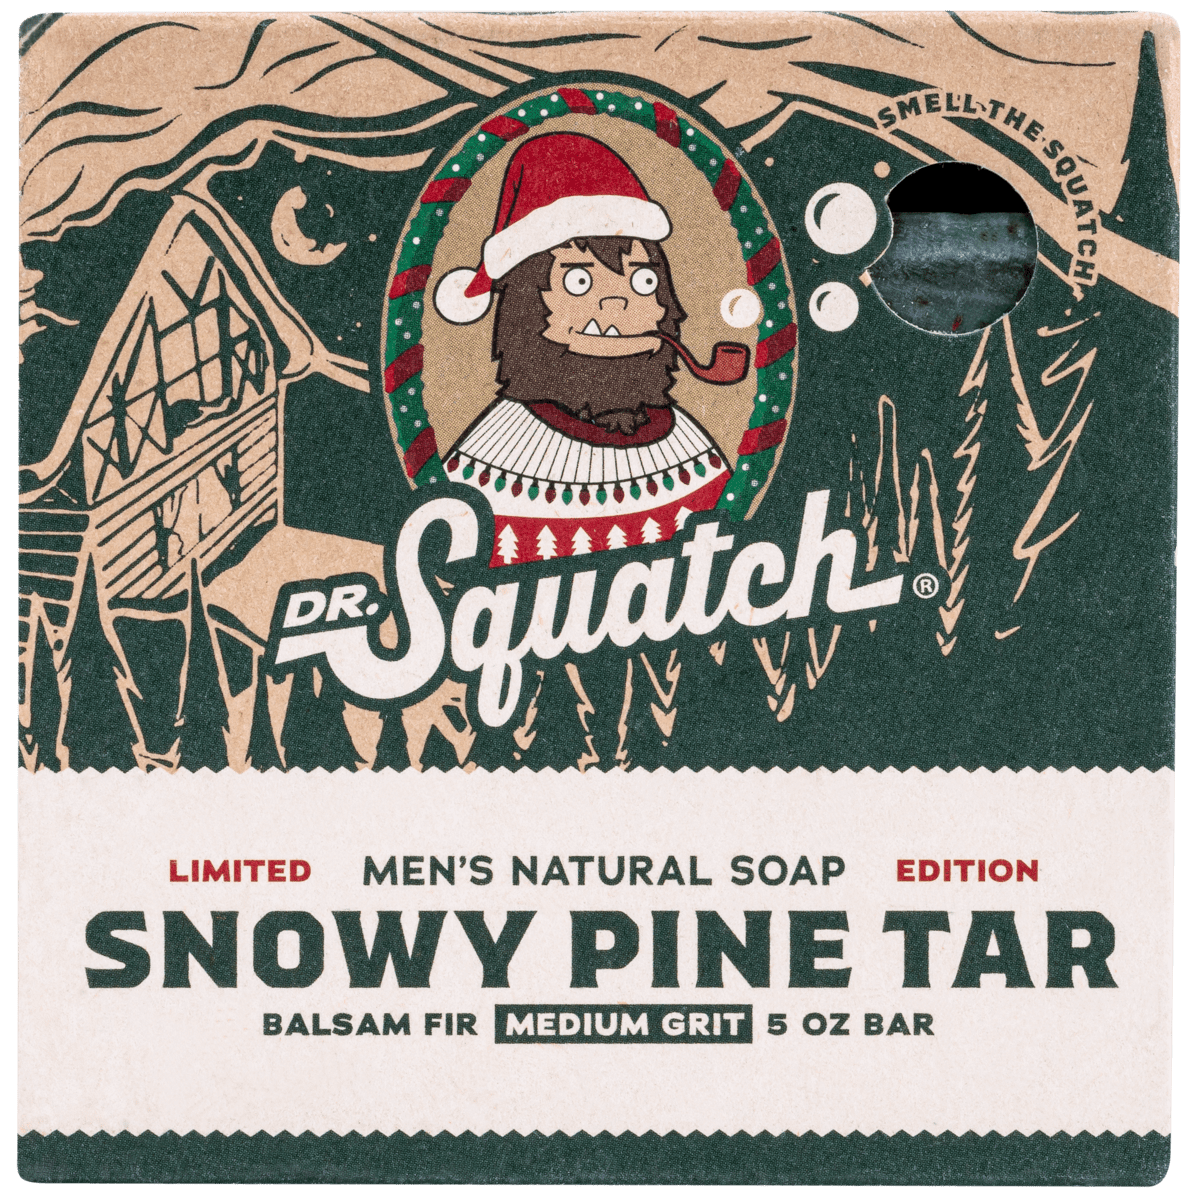  Dr. Squatch Men's Natural Soap and Hair Care - Snowy Pine Tar  and Frosty Peppermint Shampoo and Conditioner - Blizzard Expanded Pack -  Limited Edition Holiday Bundle : Beauty & Personal Care